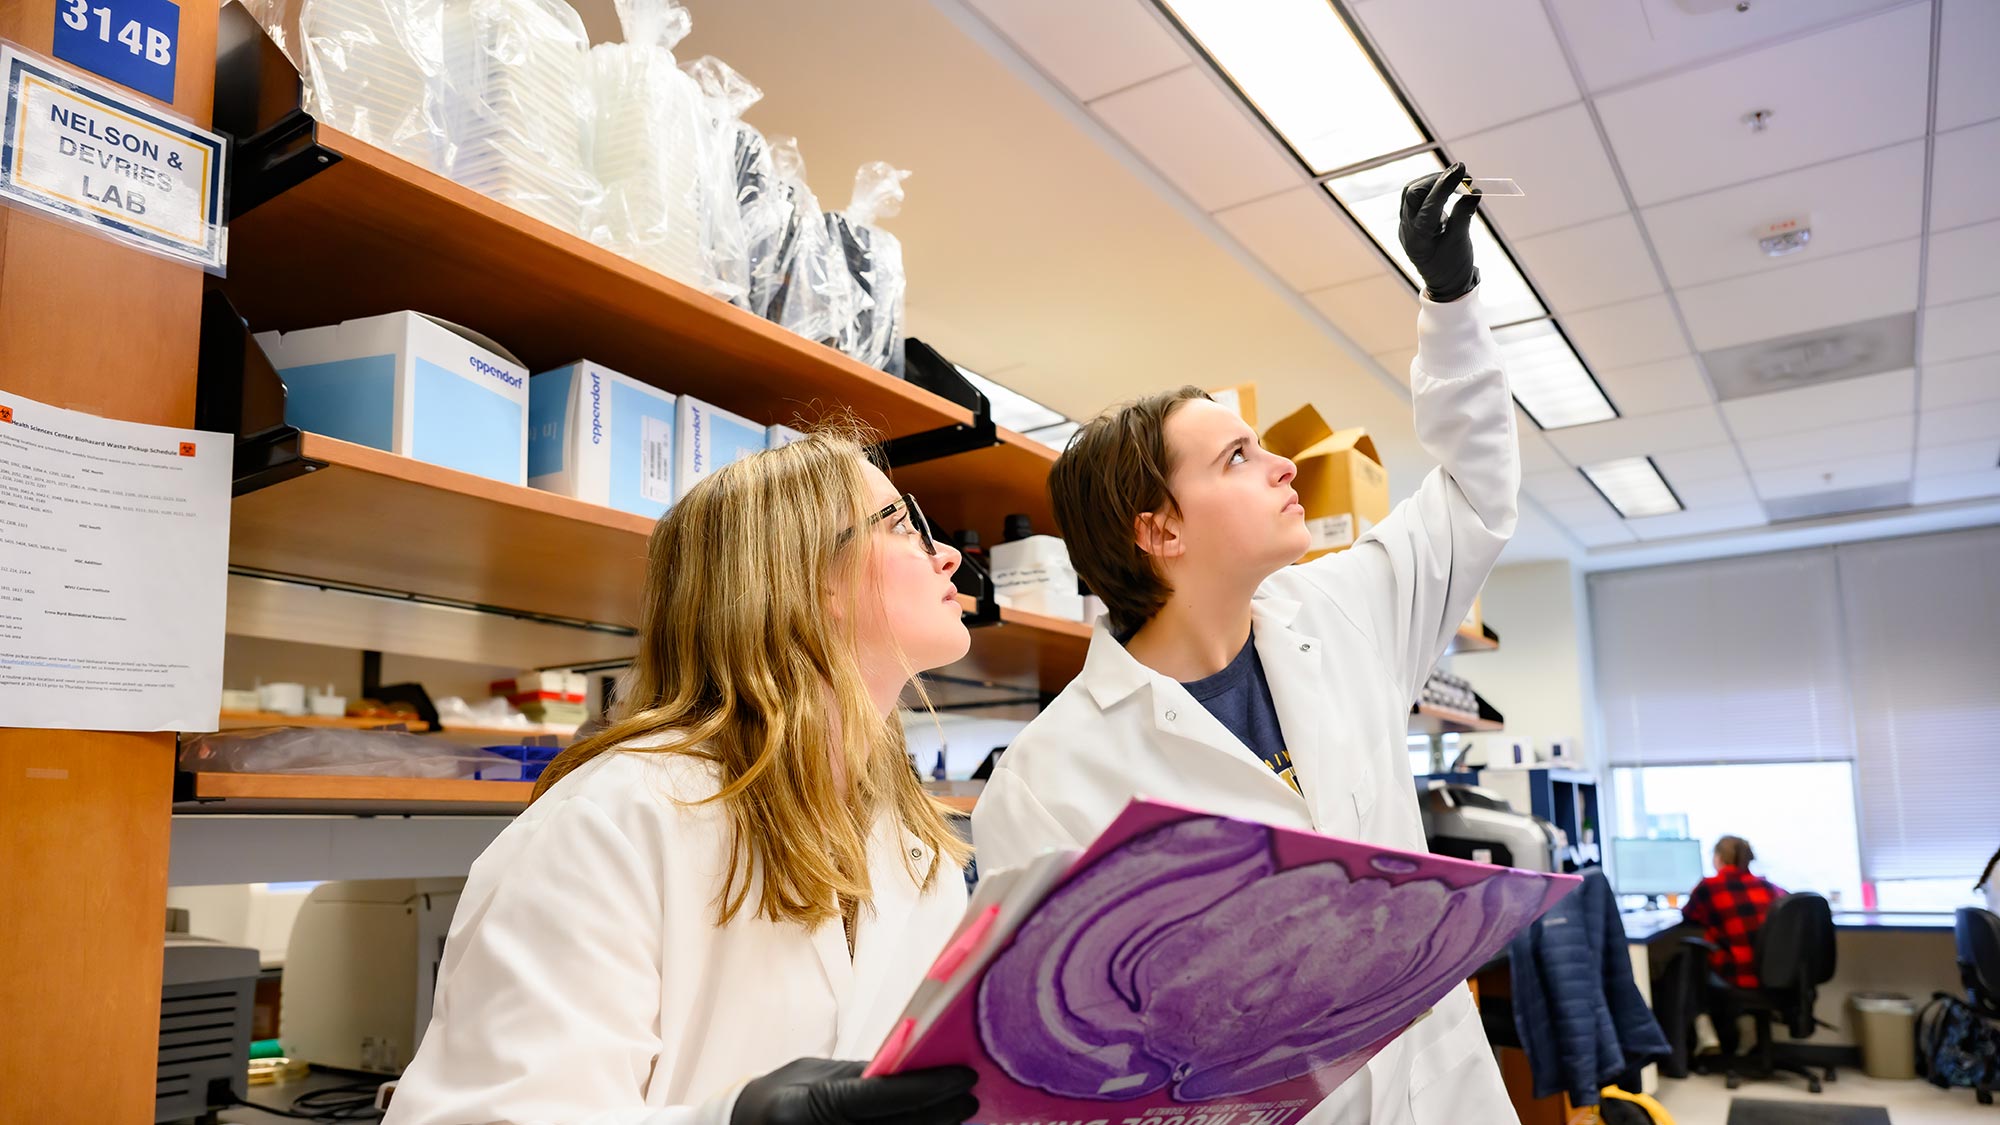 Article thumbnail for WVU neuroscience students pioneer new frontiers in undergraduate research